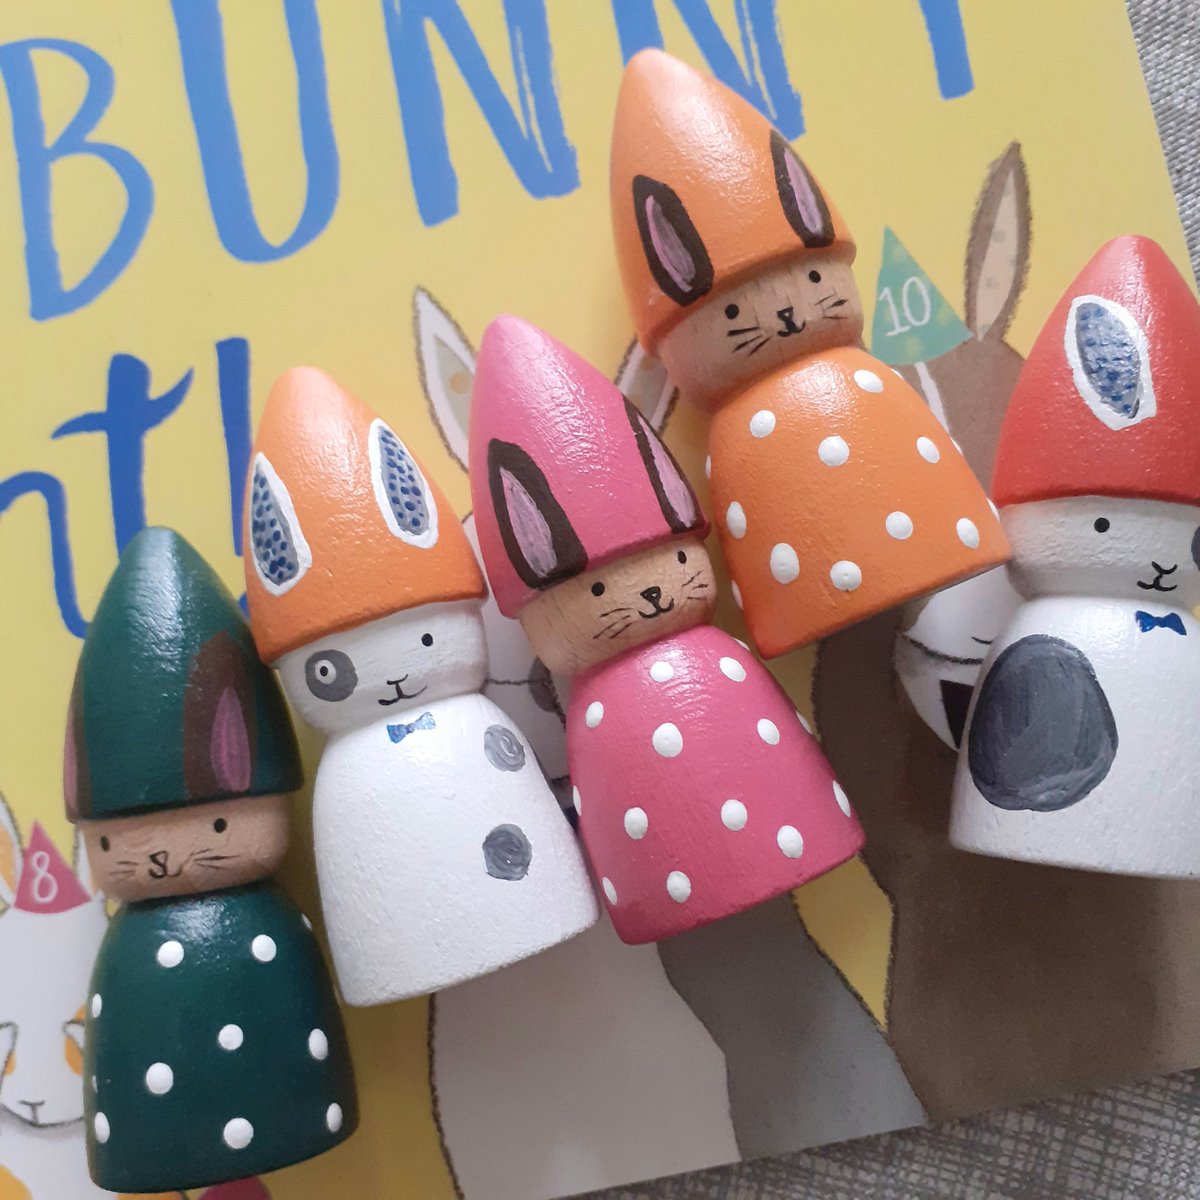 New story set just in time for Easter. Ready to enhance learning through play. 
'Everybunny Count' book and two Peggy bunnies 🐰 in the set.

littlemisspeggy.sumupstore.com

#eastergifts #bunnydoll #earlybiz #learningthroughplay #kidsgifts